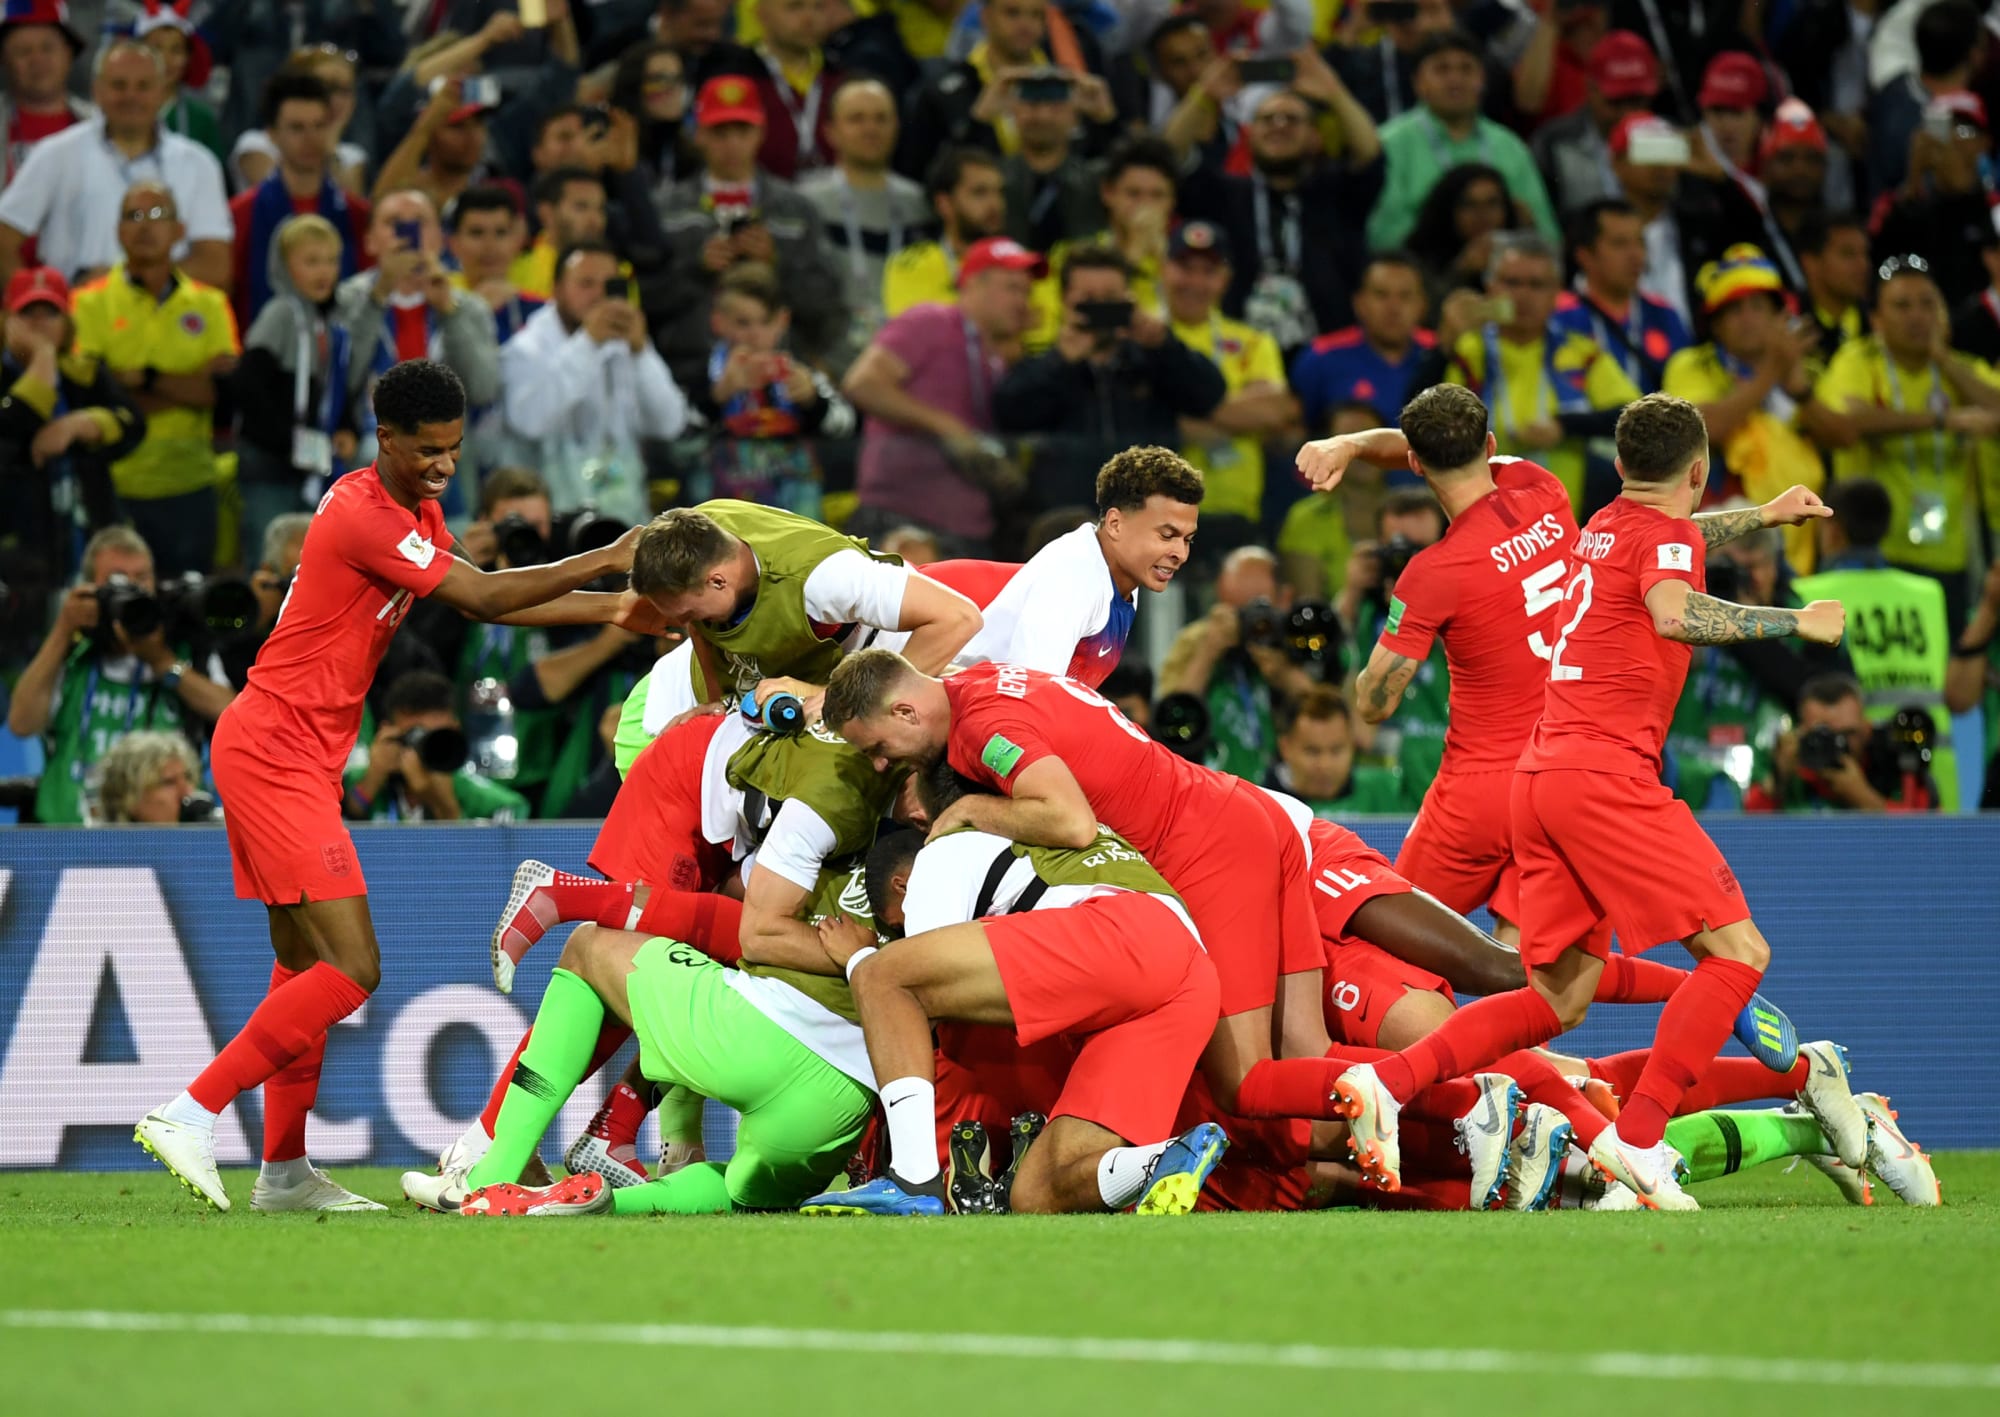 England v Colombia: three things we learned from a crazy match